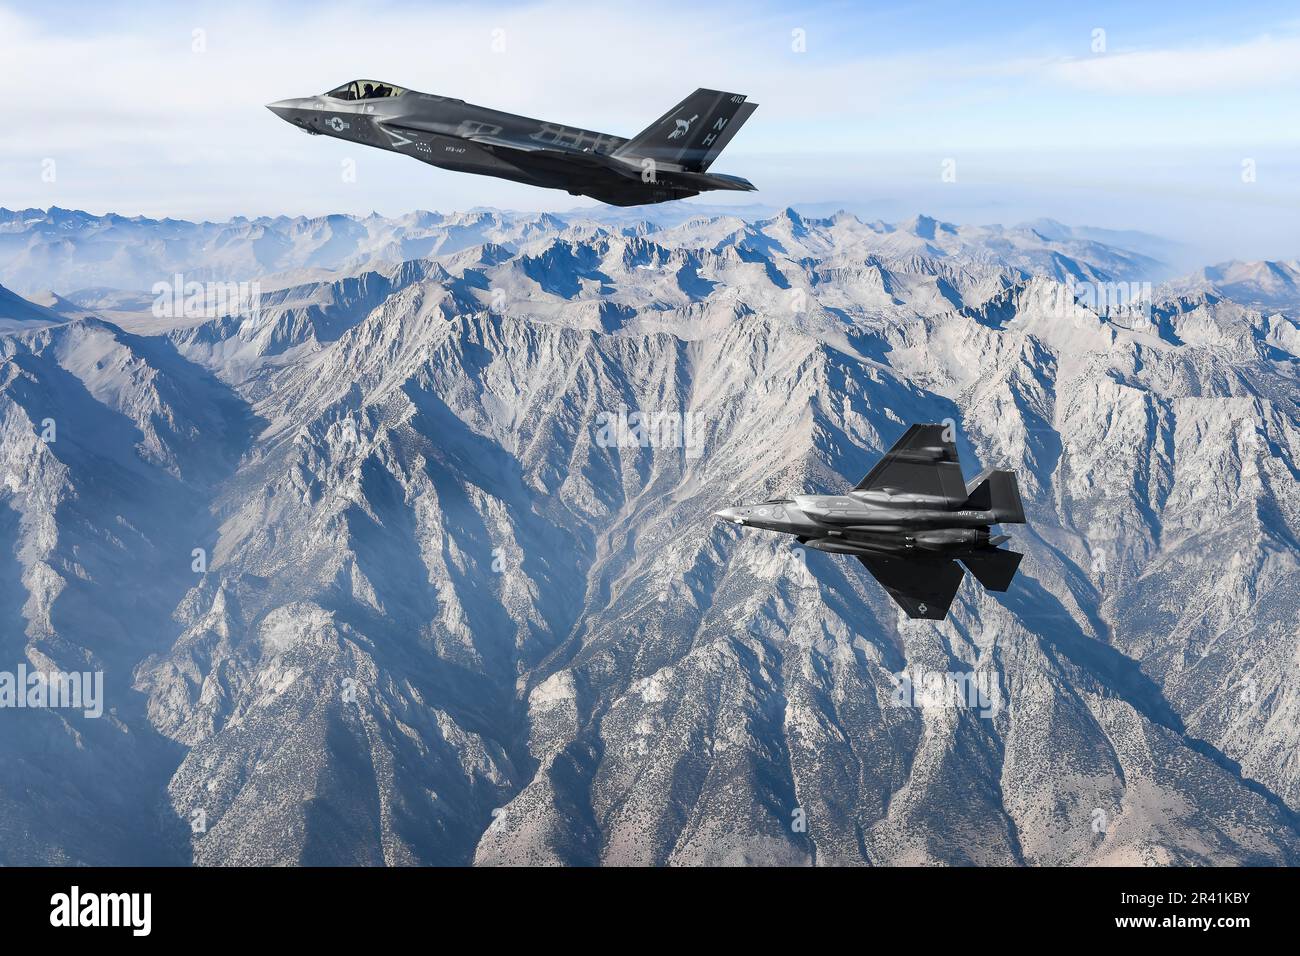 F-35C Lightning II's, attached to the “Argonauts” of Strike Fighter Squadron (VFA) 147, stationed at Naval Air Station Lemoore, fly in formation . VFA-147 is the first U.S. Navy Operational F-35C squadron based out of NAS Lemoore. Commander, Joint Strike Fighter Wing, headquartered at Naval Air Station Lemoore, Calif. ensures that each F-35C squadron is fully combat-ready to conduct carrier-based, all-weather, attack, fighter and support missions for Commander, Naval Air Forces. U.S. Navy/DoD photo by Shannon E. Renfroe Stock Photo